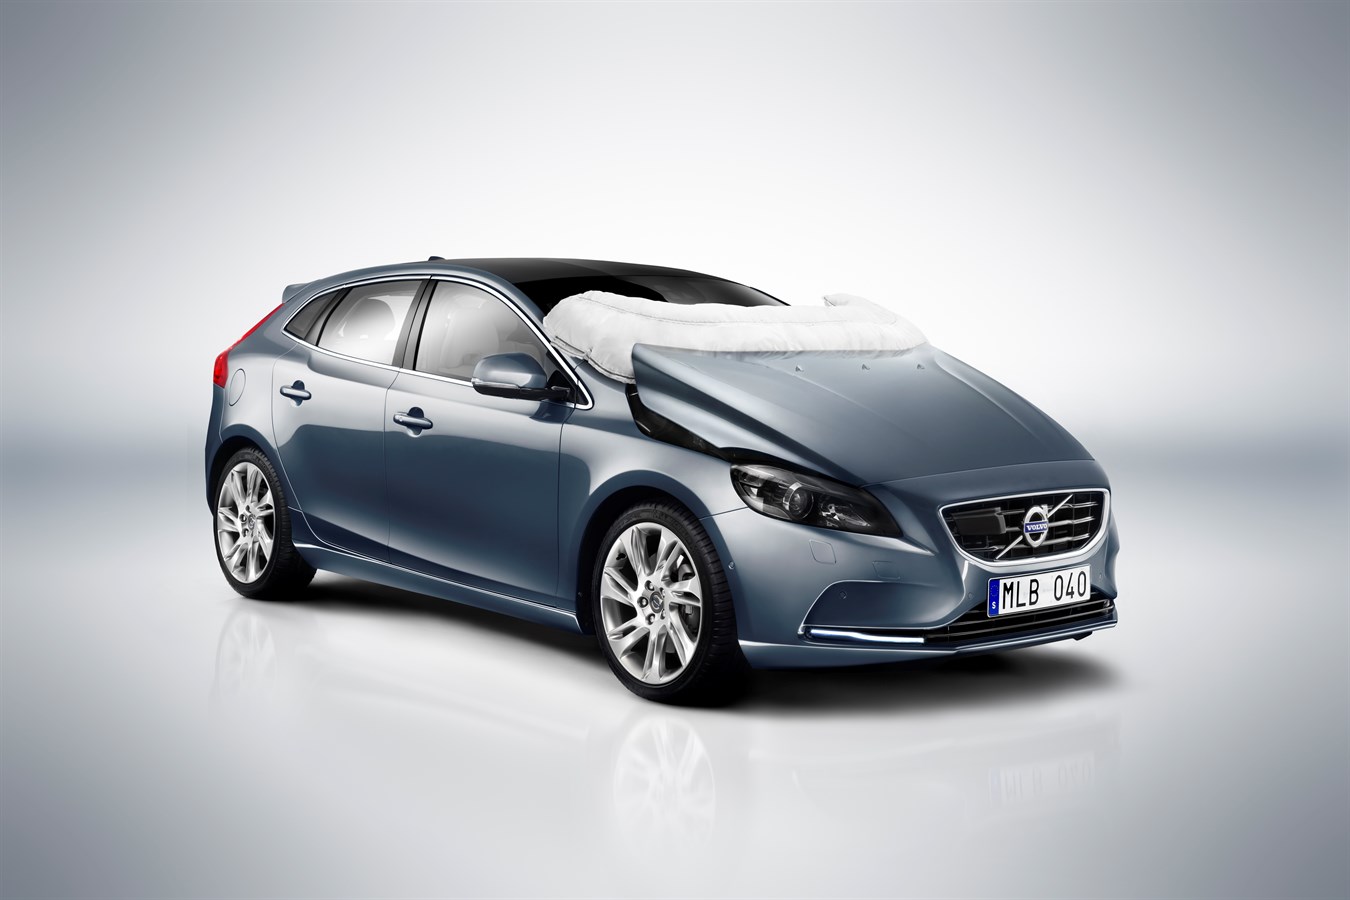 Record-breaking safety rating for the all-new Volvo V40 in Euro NCAP test -  Volvo Cars Global Media Newsroom